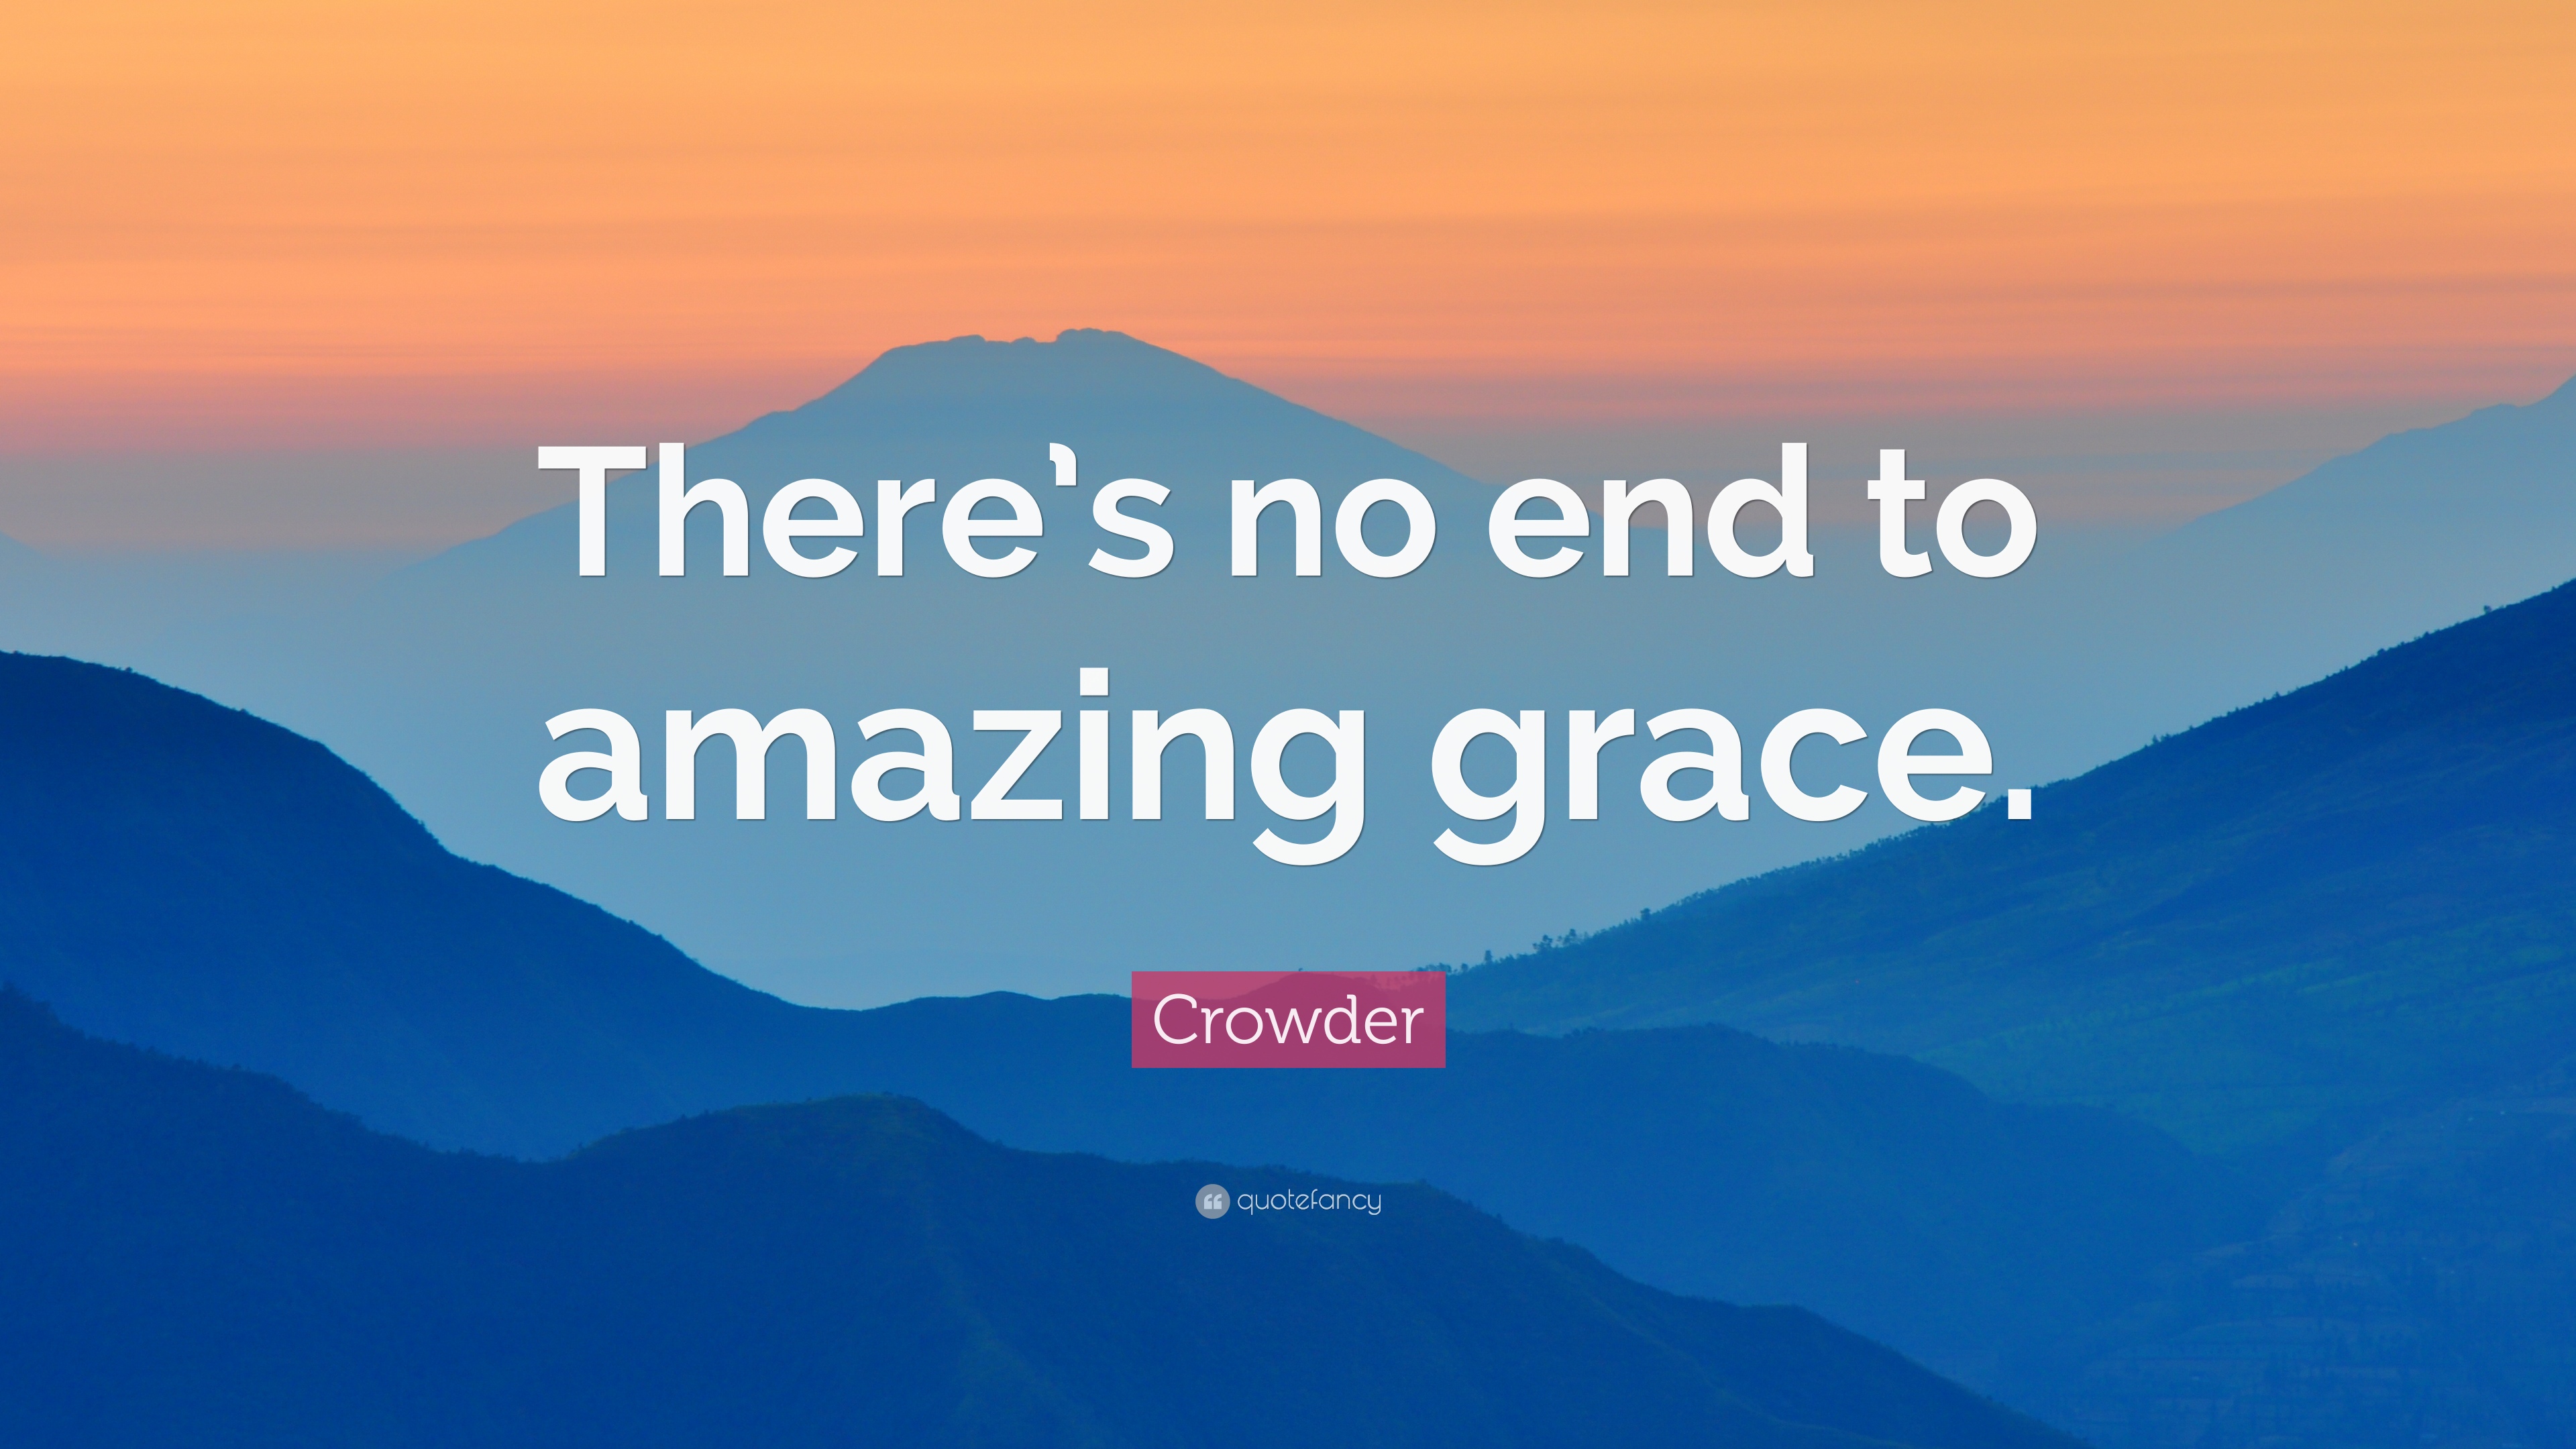 Crowder Quote: "There's no end to amazing grace. 